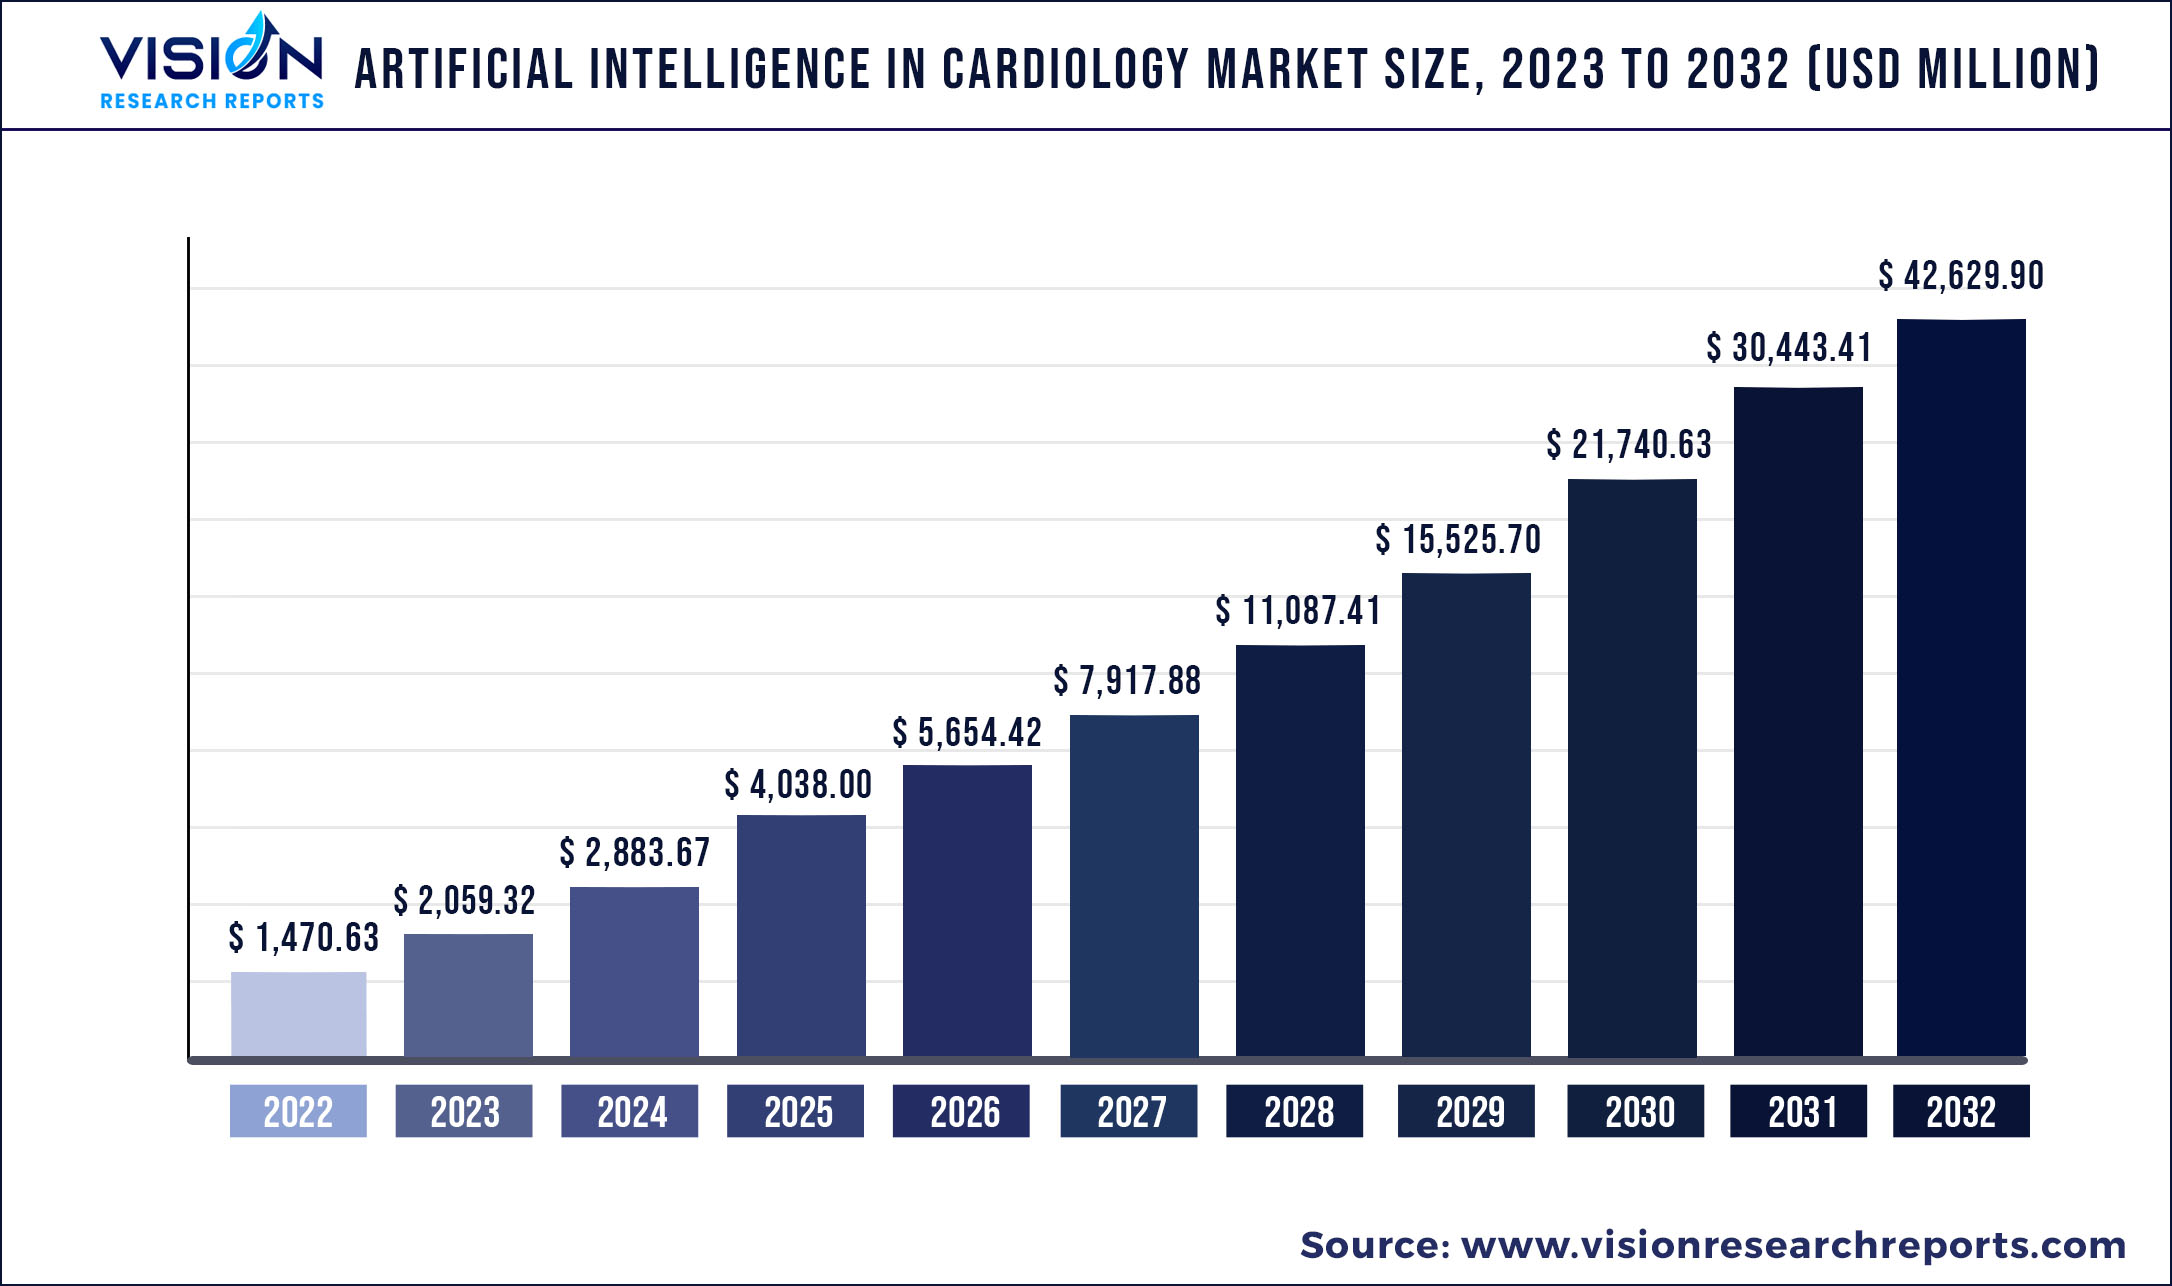 Artificial Intelligence in Cardiology Market Size 2023 to 2032